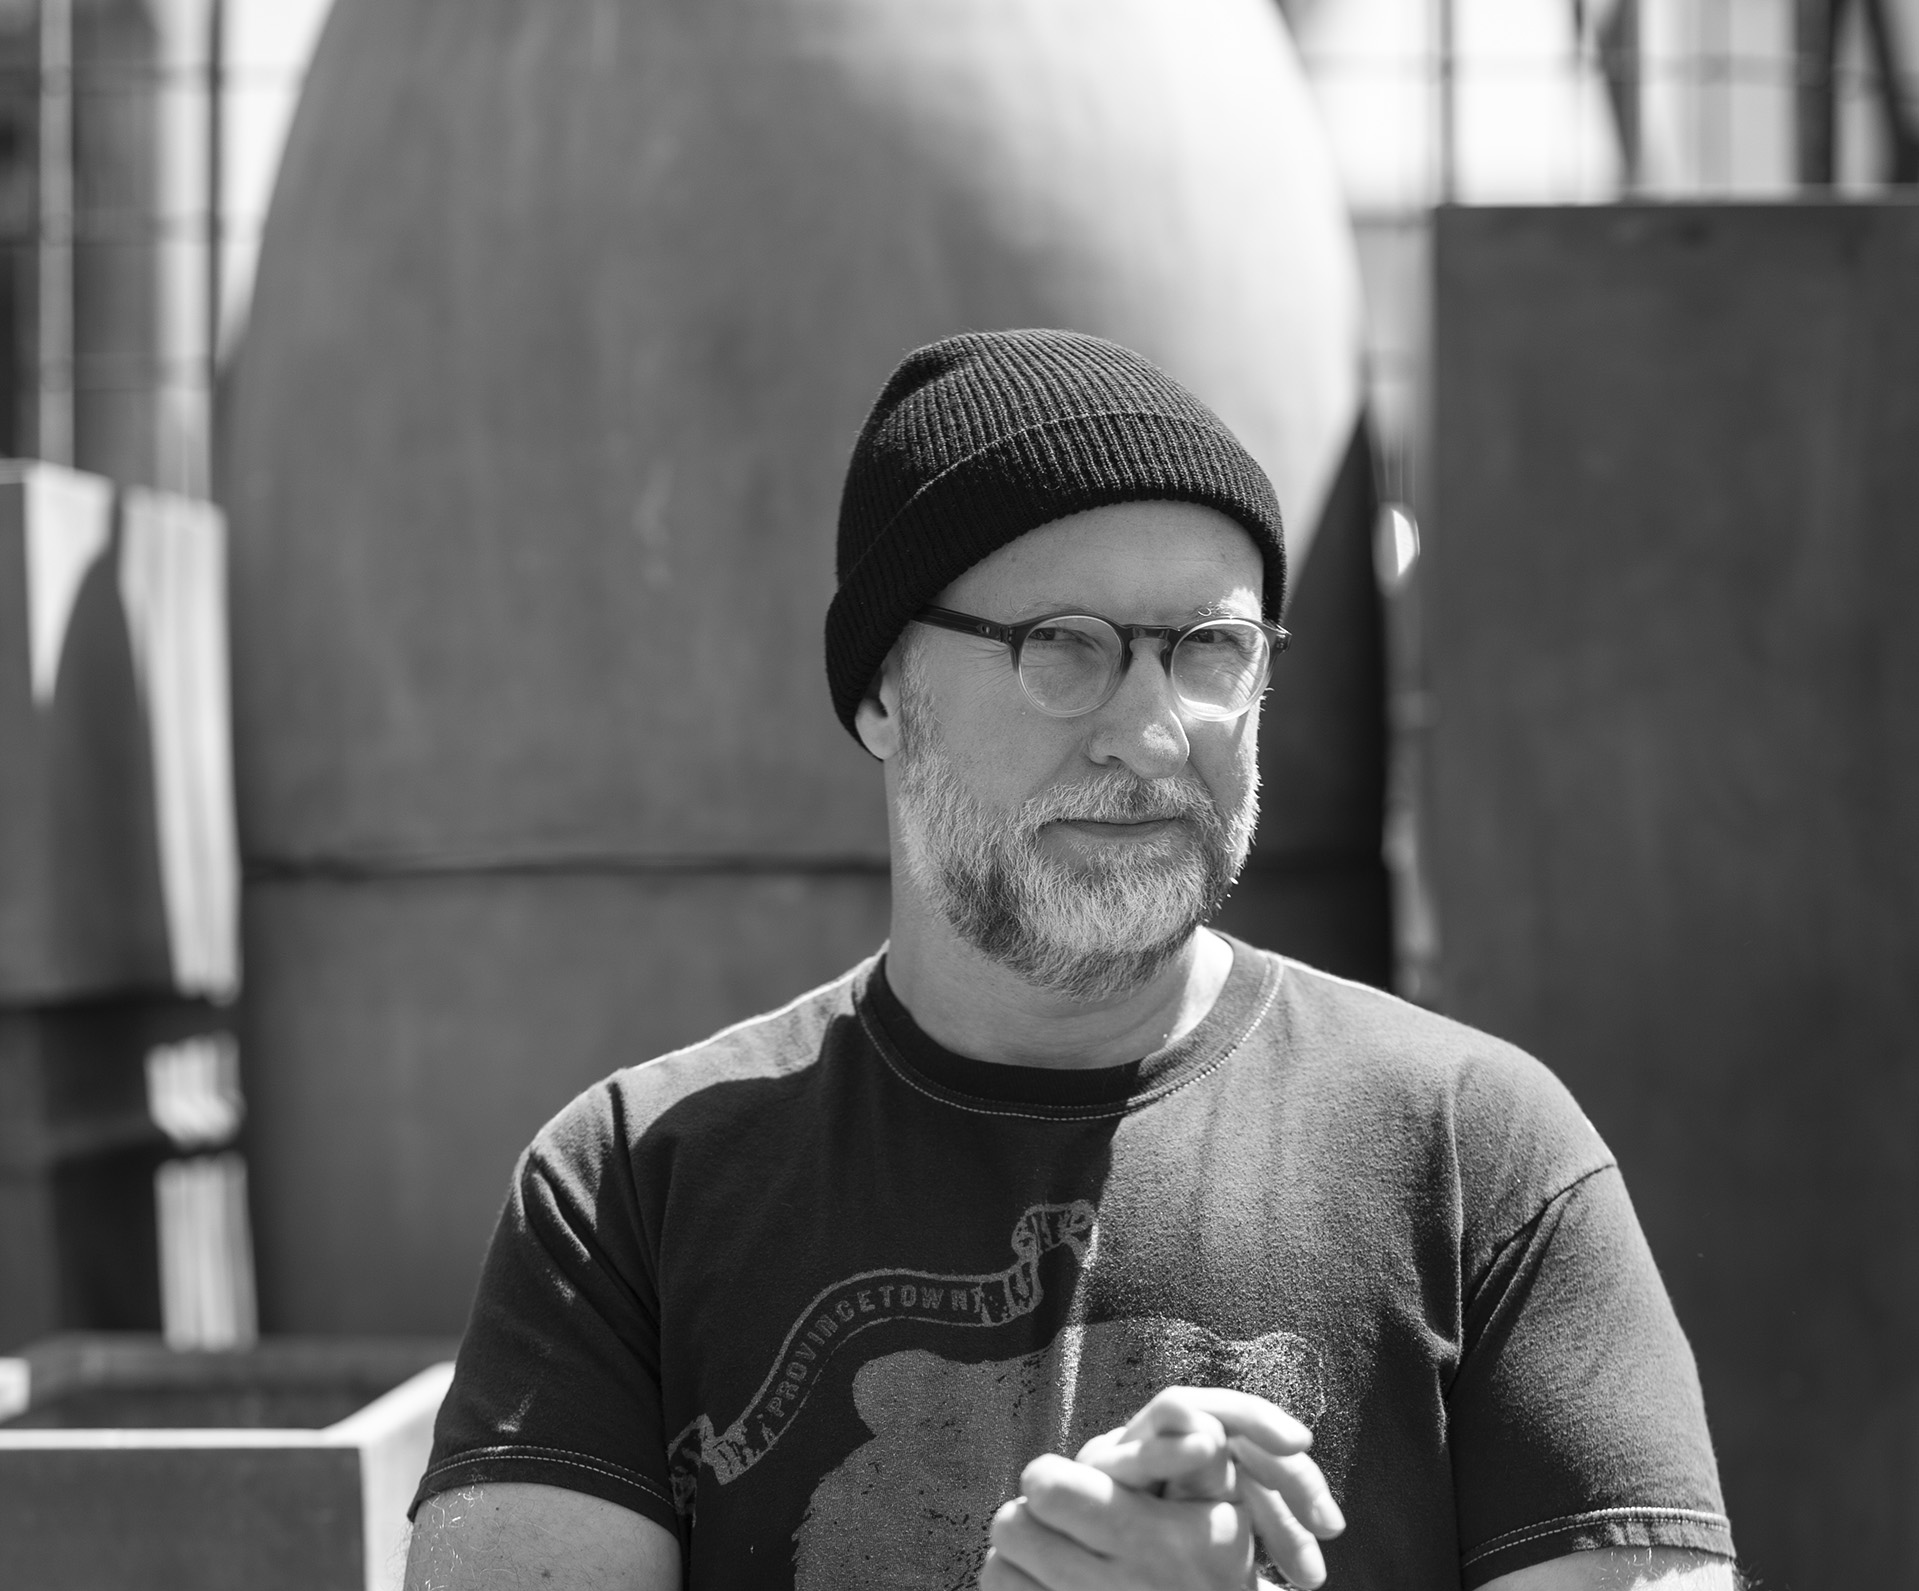 BOB MOULD shares solo performance of 'Wishing Well' and trailer for 8LP Distortion: Live boxset 2